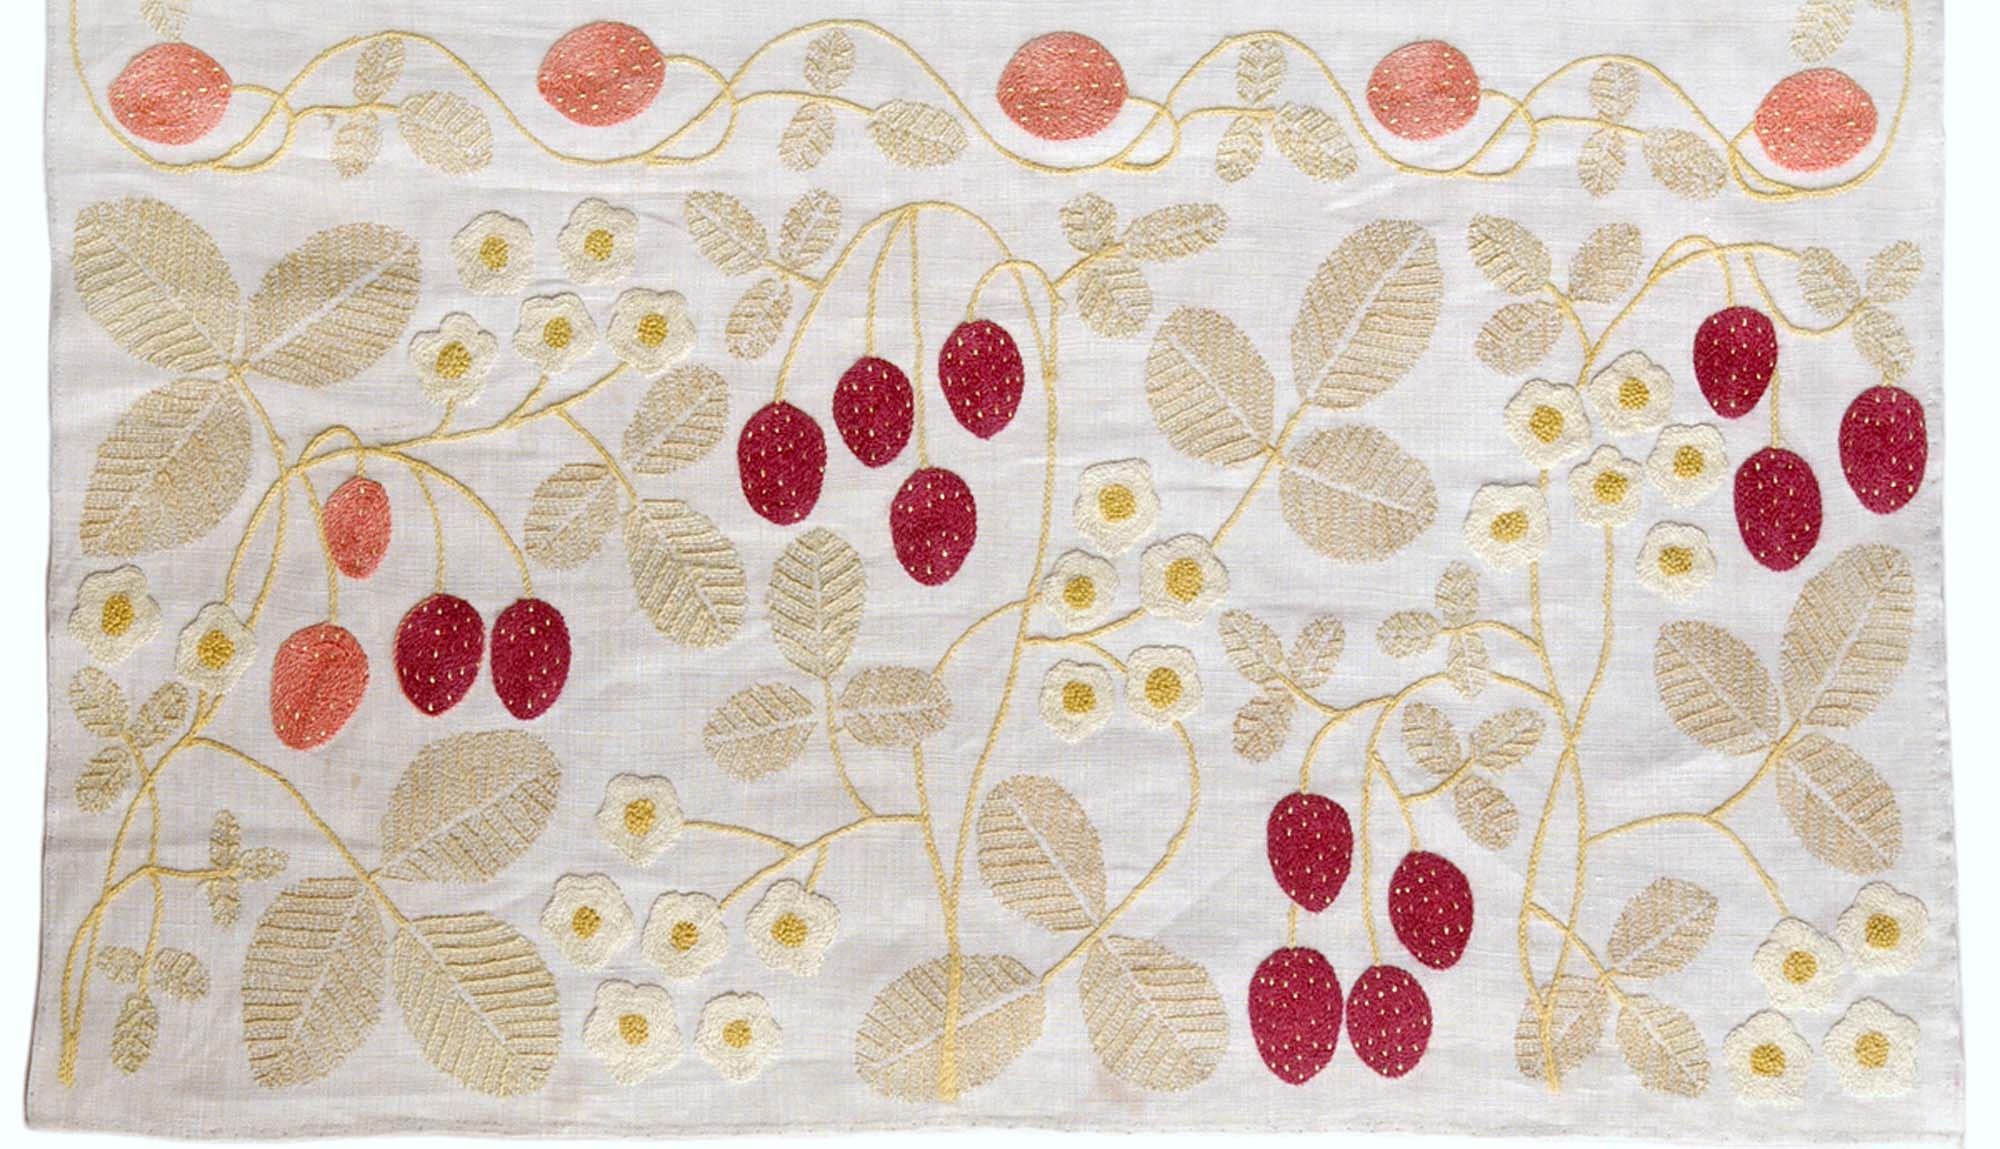 The tablecloth, designed by Gimson and embroidered by Lovibond.